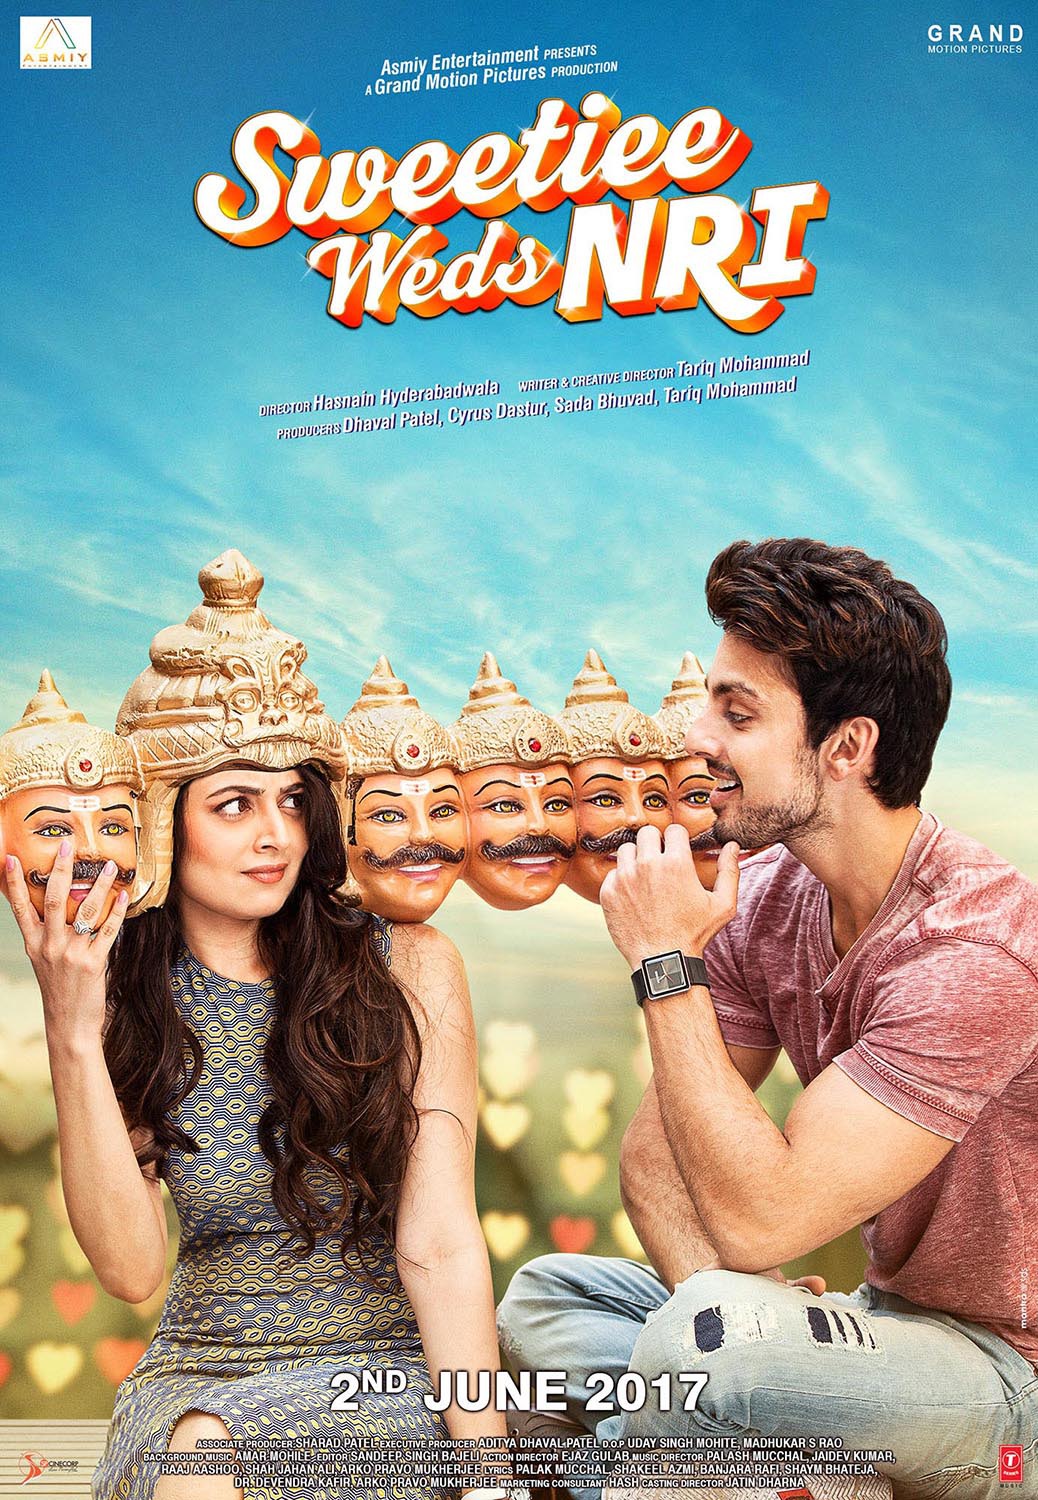 Extra Large Movie Poster Image for Sweetiee Weds NRI 